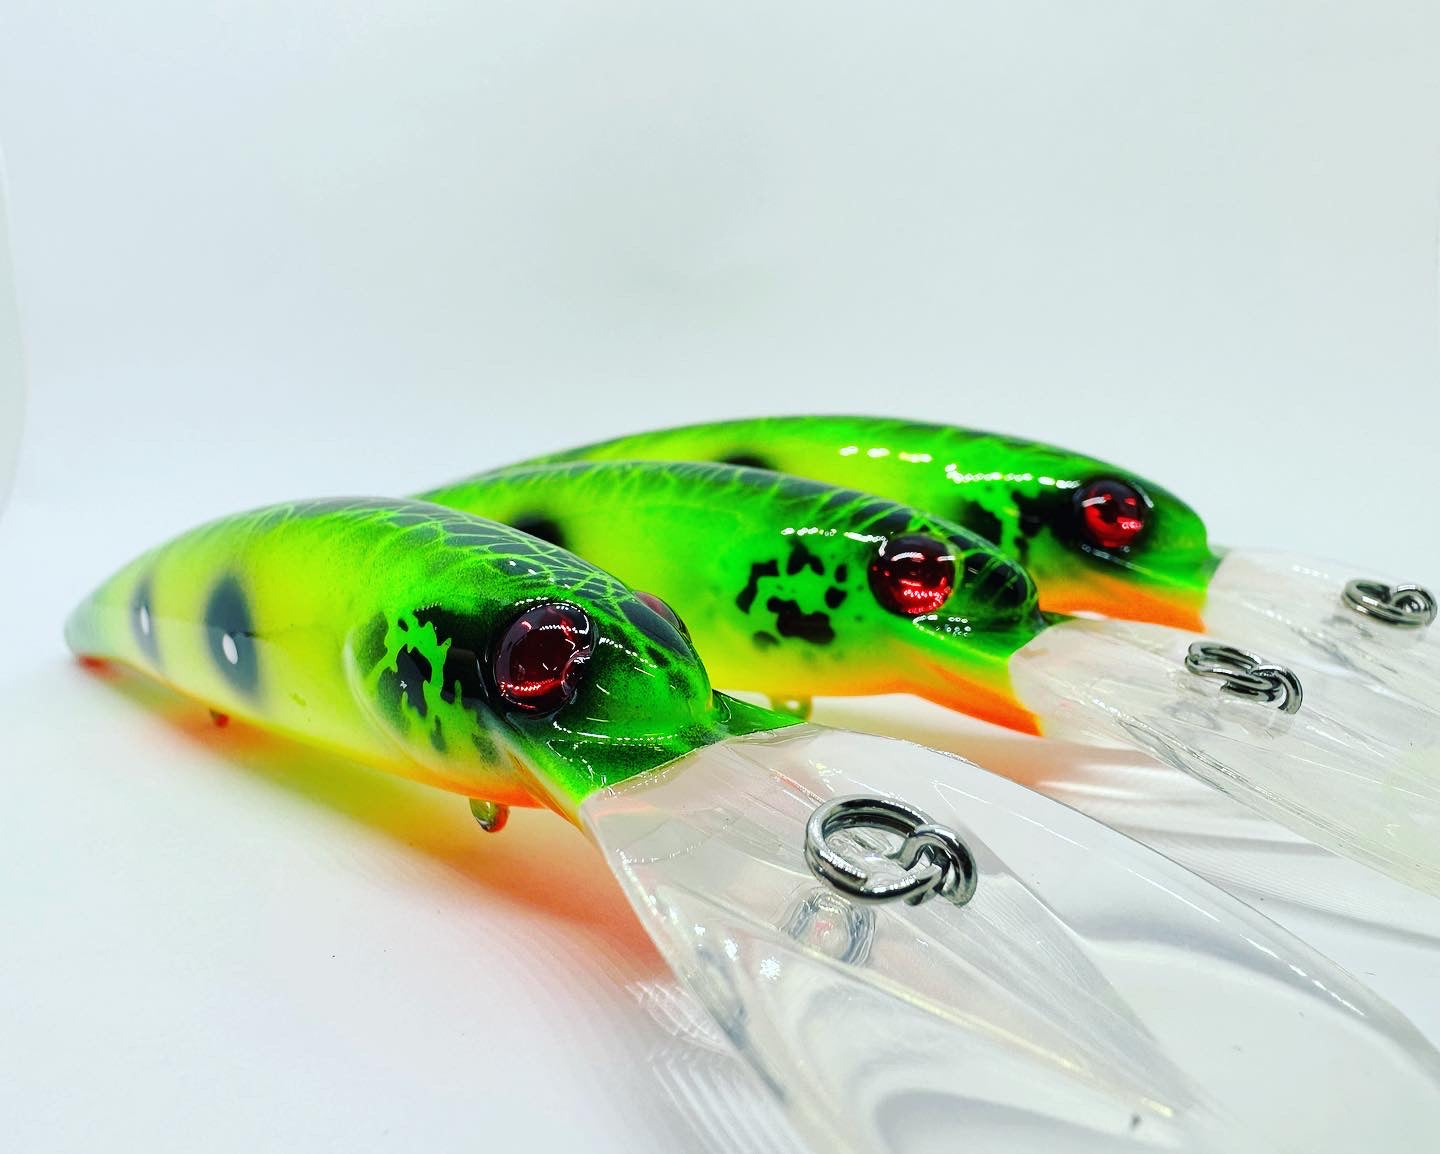 Custom Bandit Crankbait - Toxic Perch by Vertical Jigs and Lures